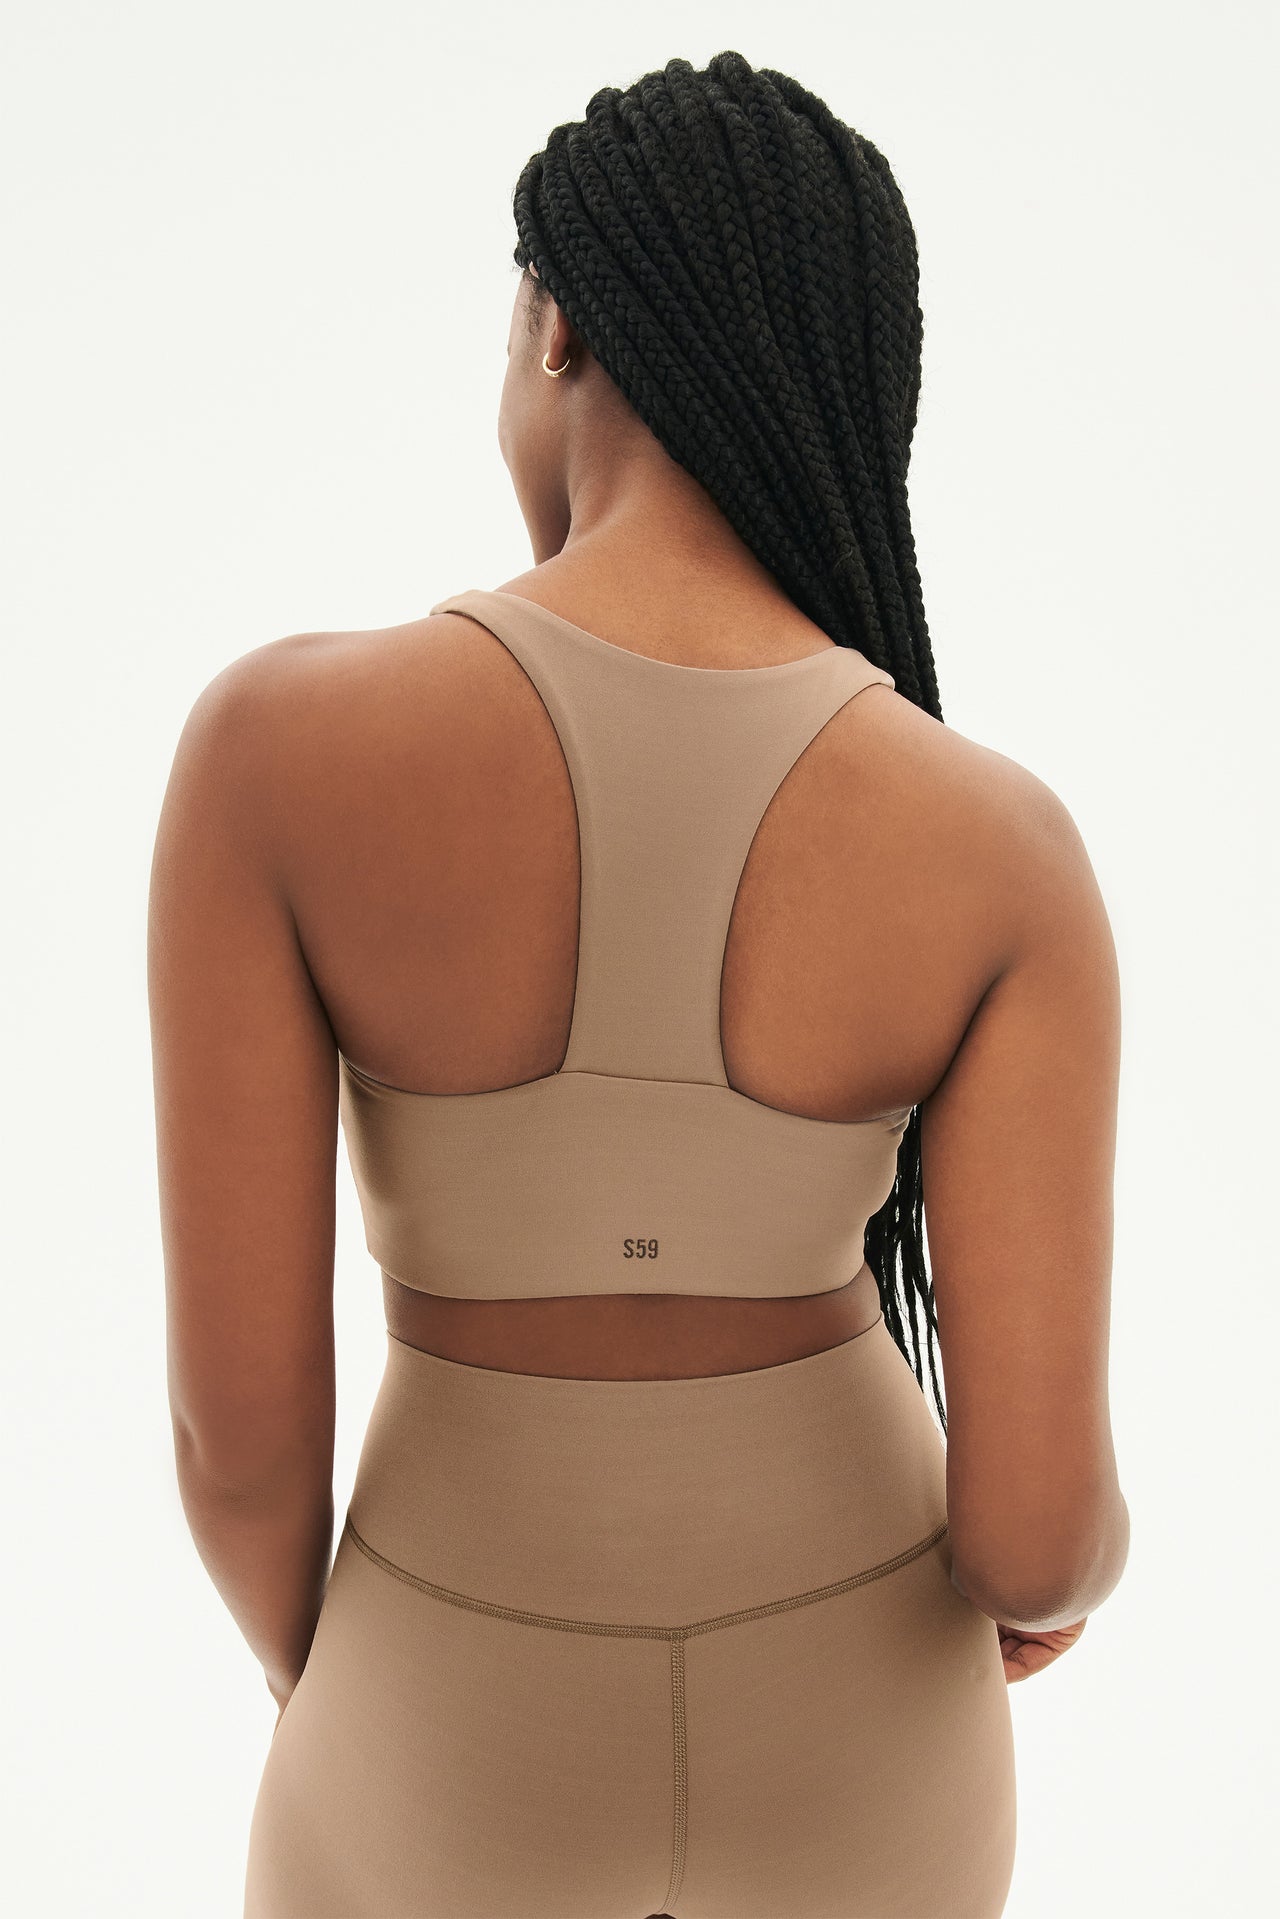 Back view of woman with black braids wearing light brown leggings  and light brown bra with racerback